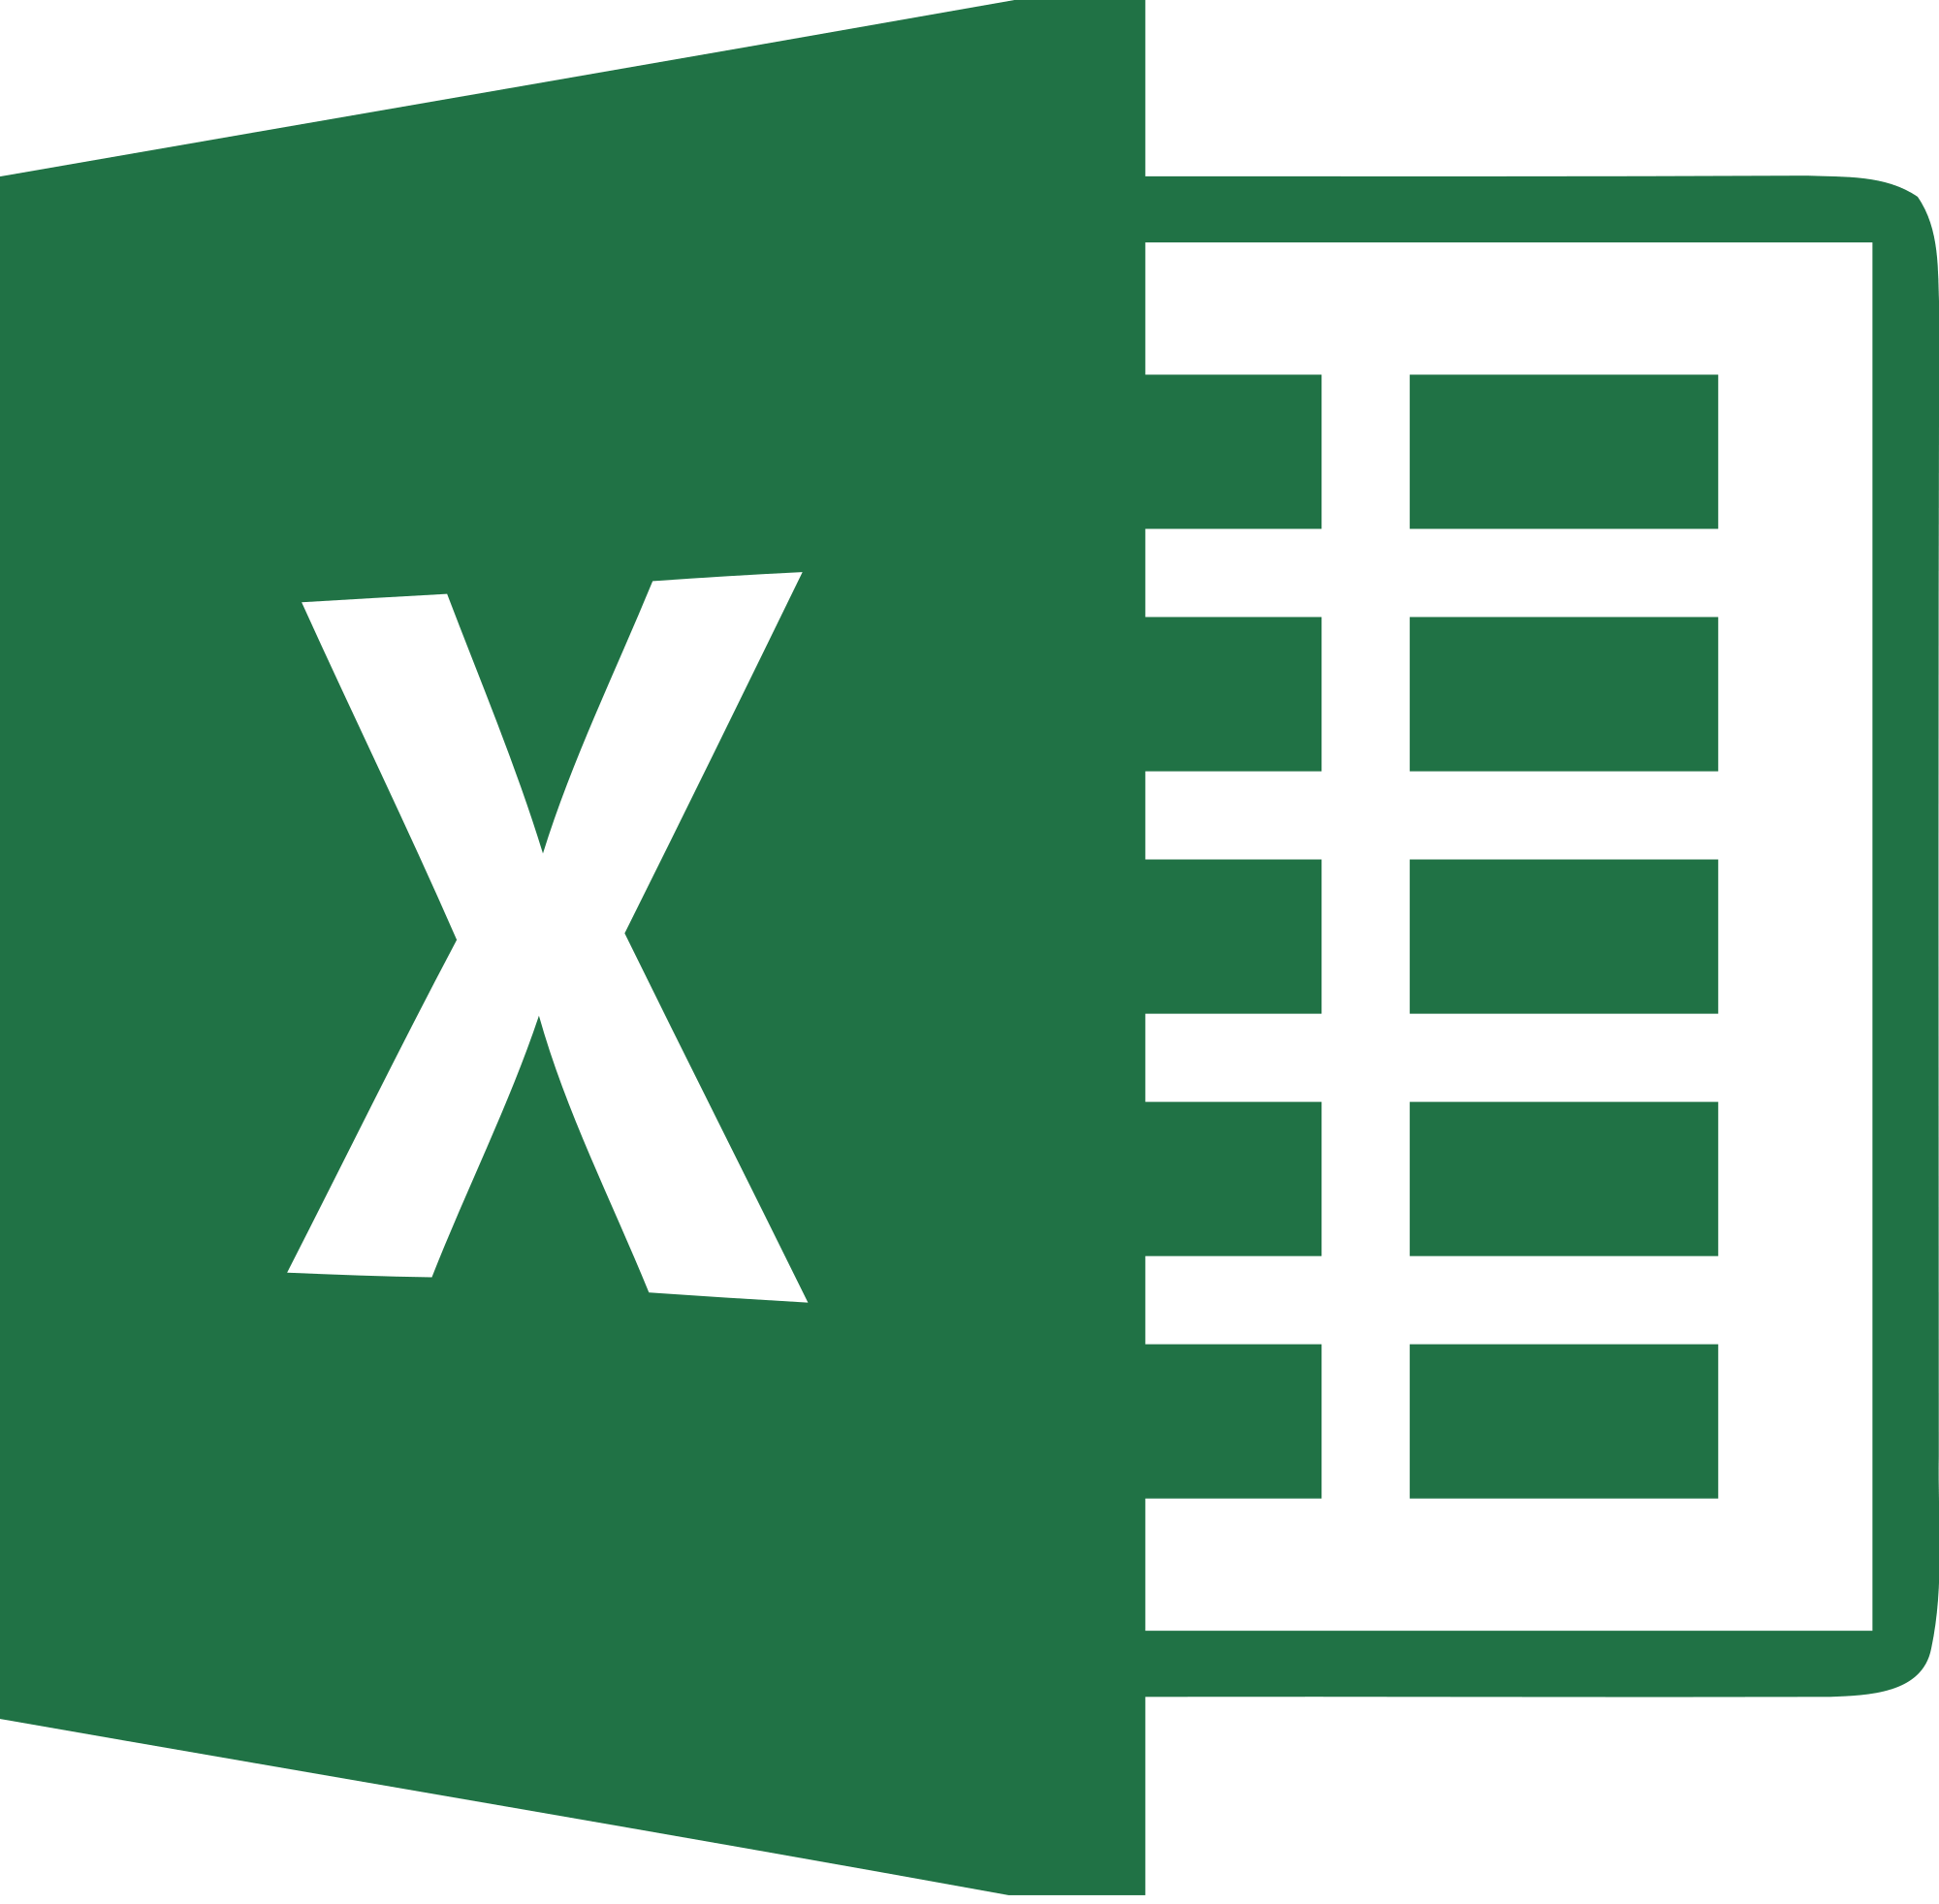 Excel Logo - File:Microsoft Excel 2013 logo.svg - Wikimedia Commons